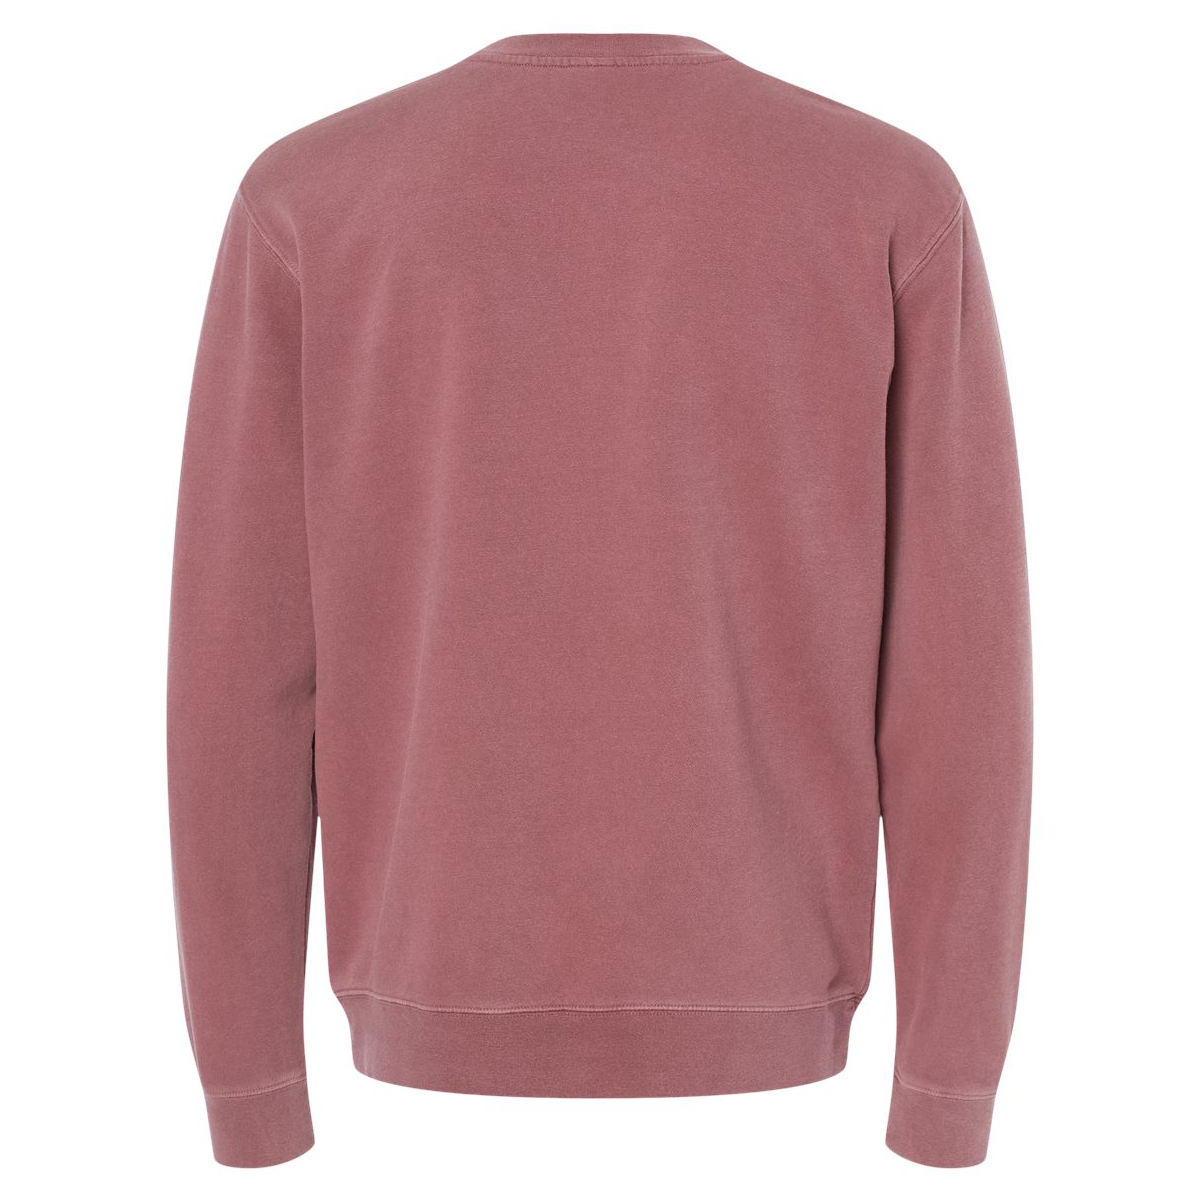 #PRM3500 Independent Trading Company Unisex Midweight Pigment Dyed Crew ...